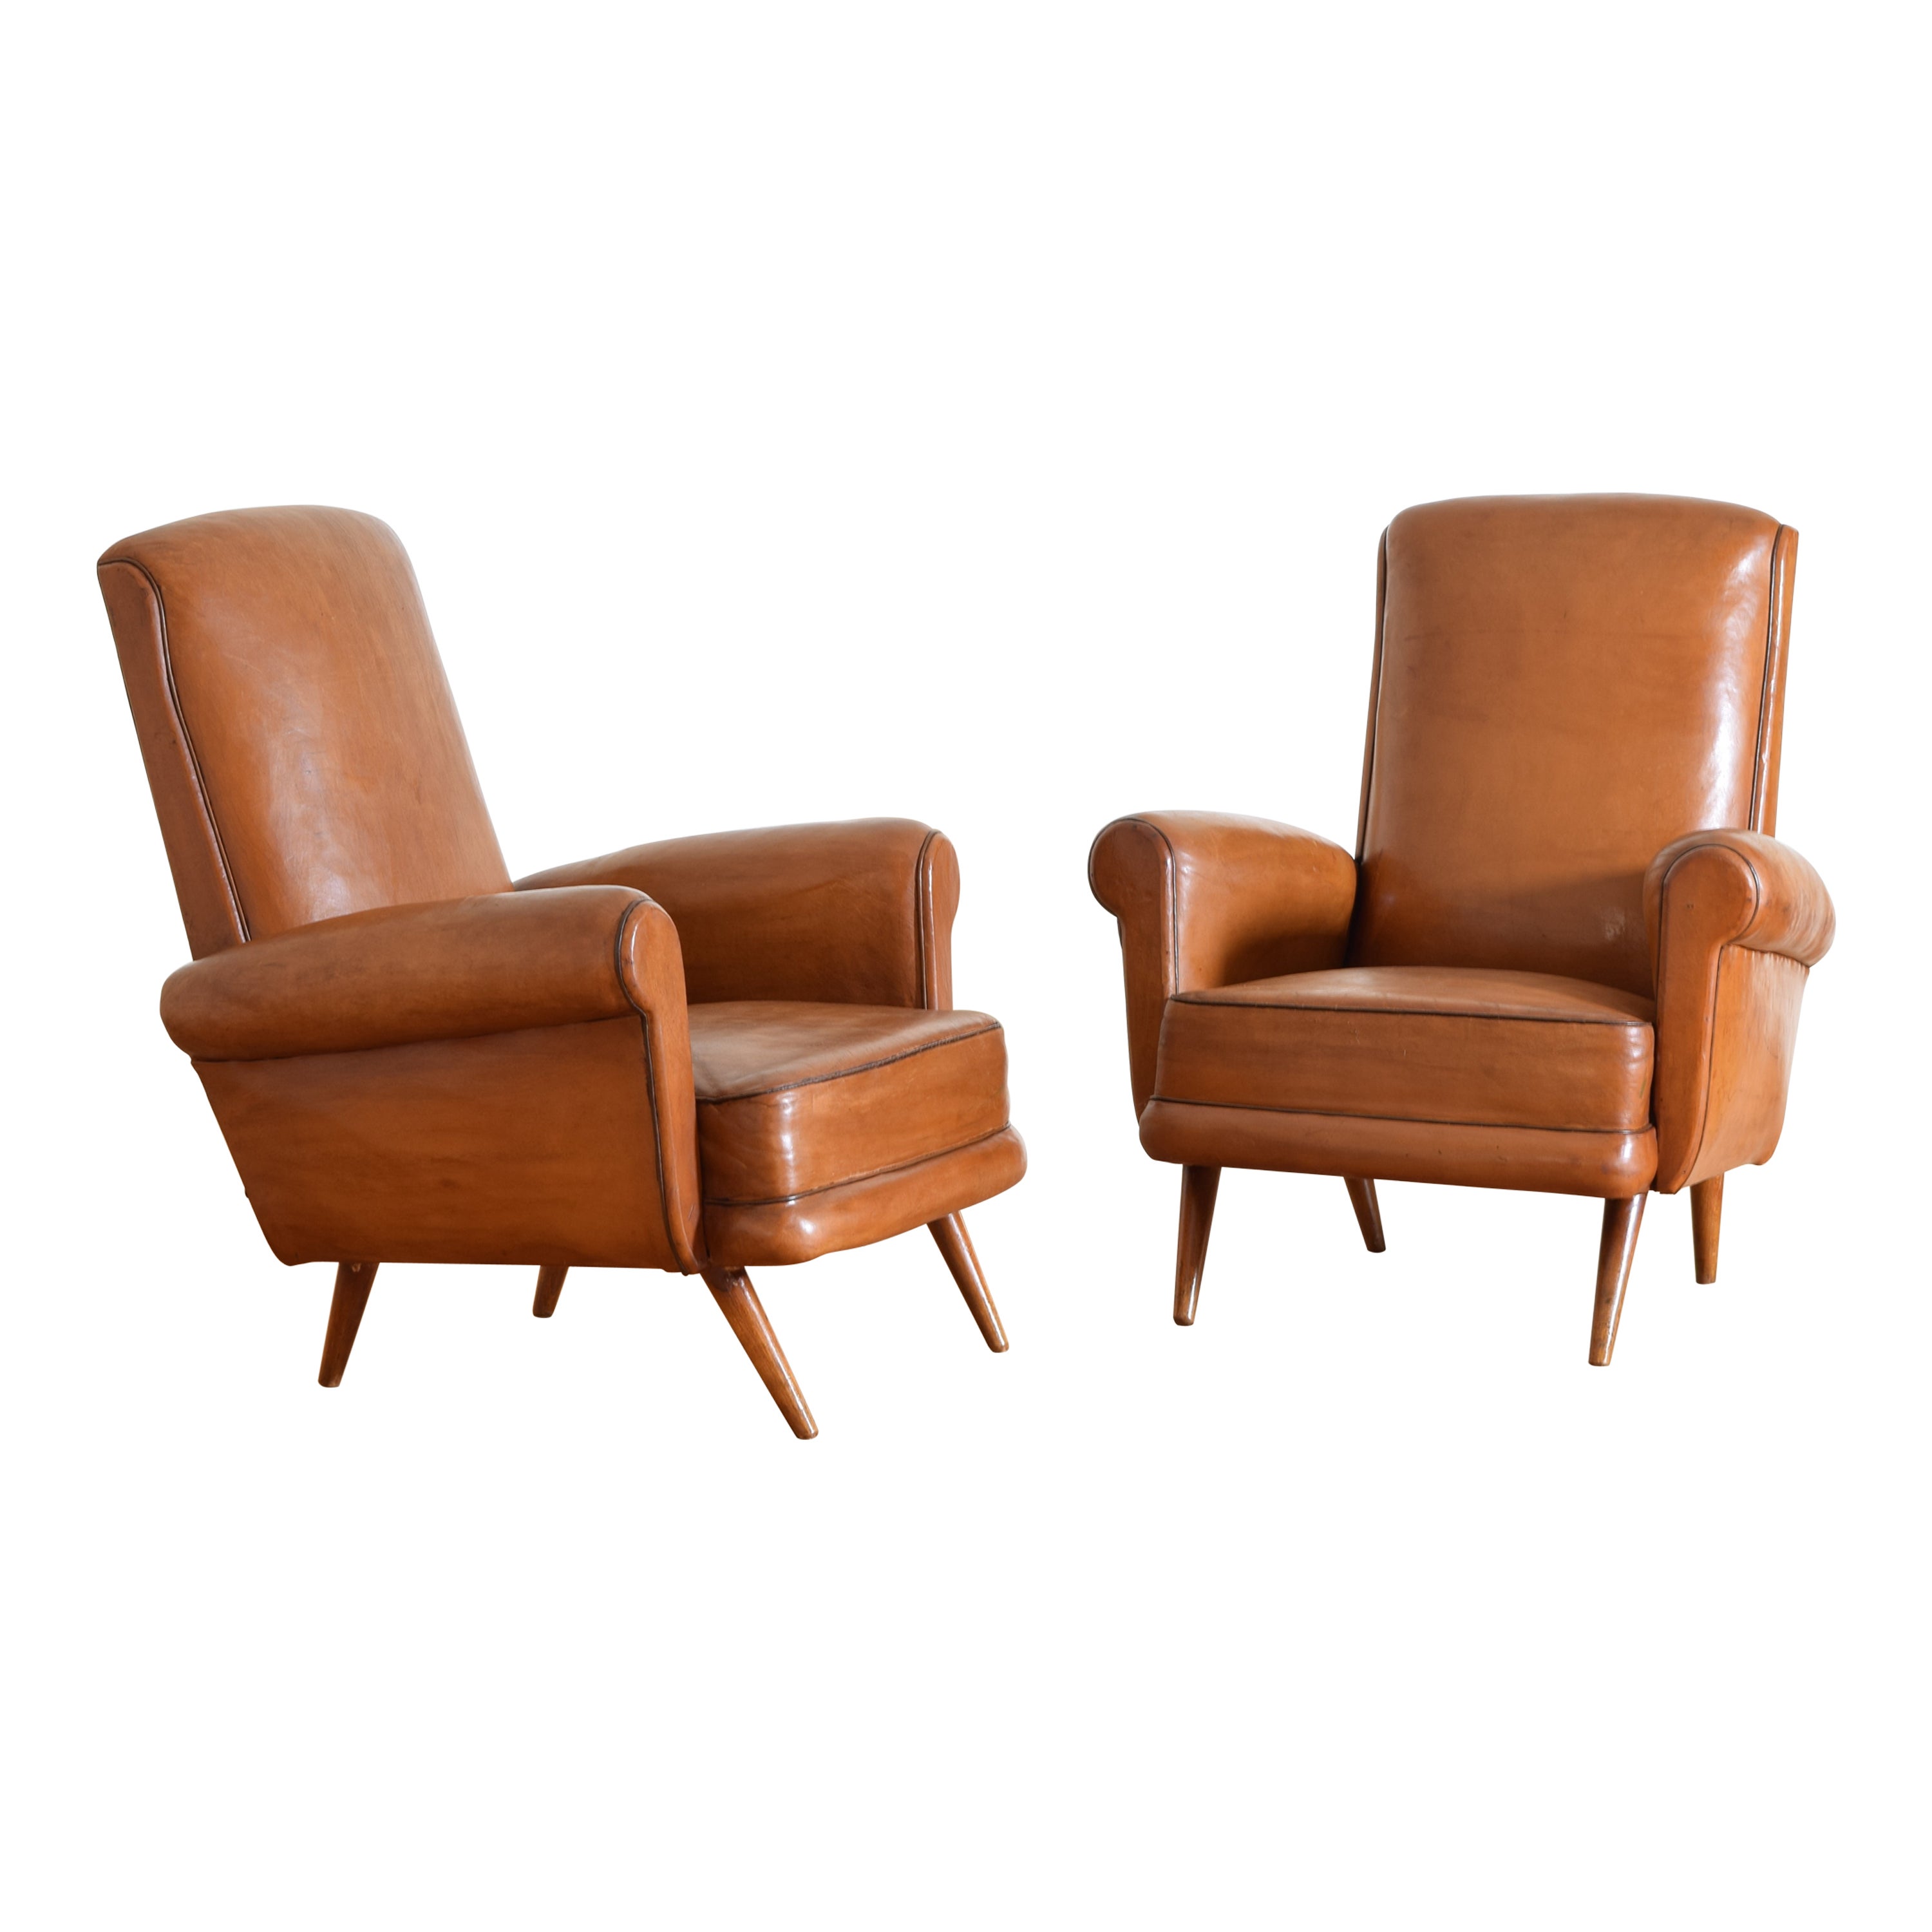 Pair French Art Deco Period Leather Upholstered Club Chairs, 2nd quarter 20thc For Sale